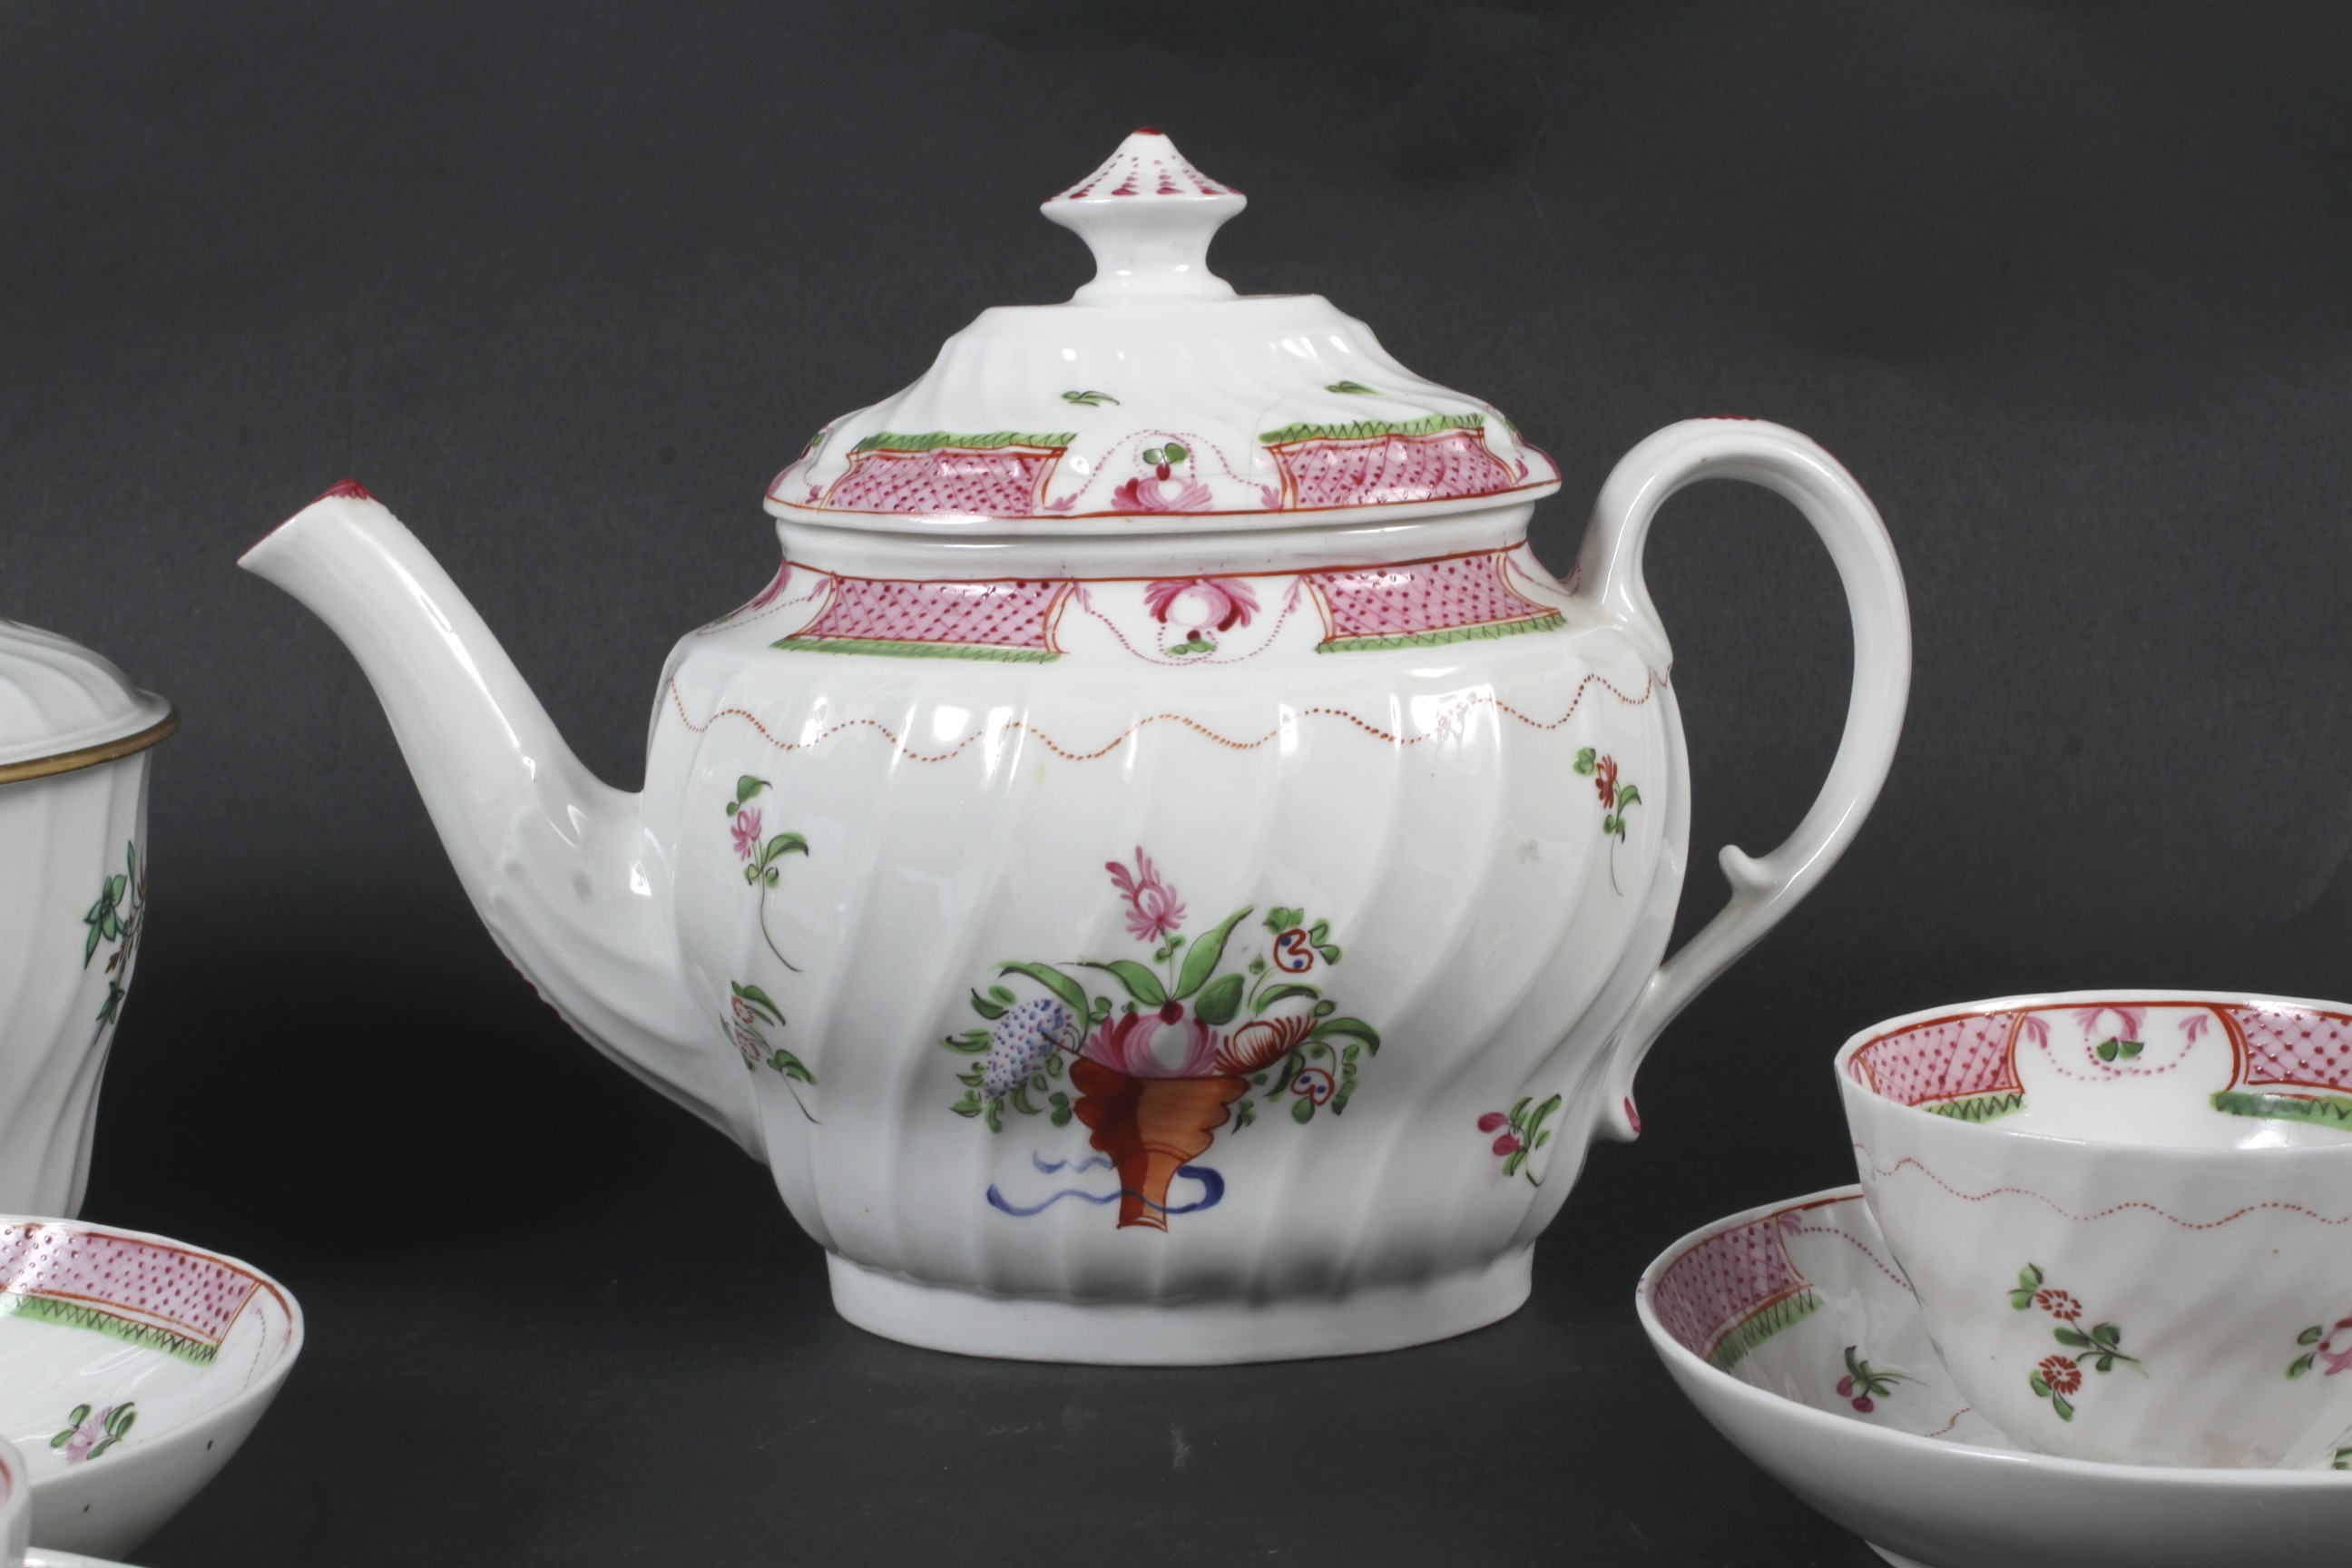 A late 18th century New Hall porcelain part tea service and an English porcelain sugar-bowl and - Image 3 of 3